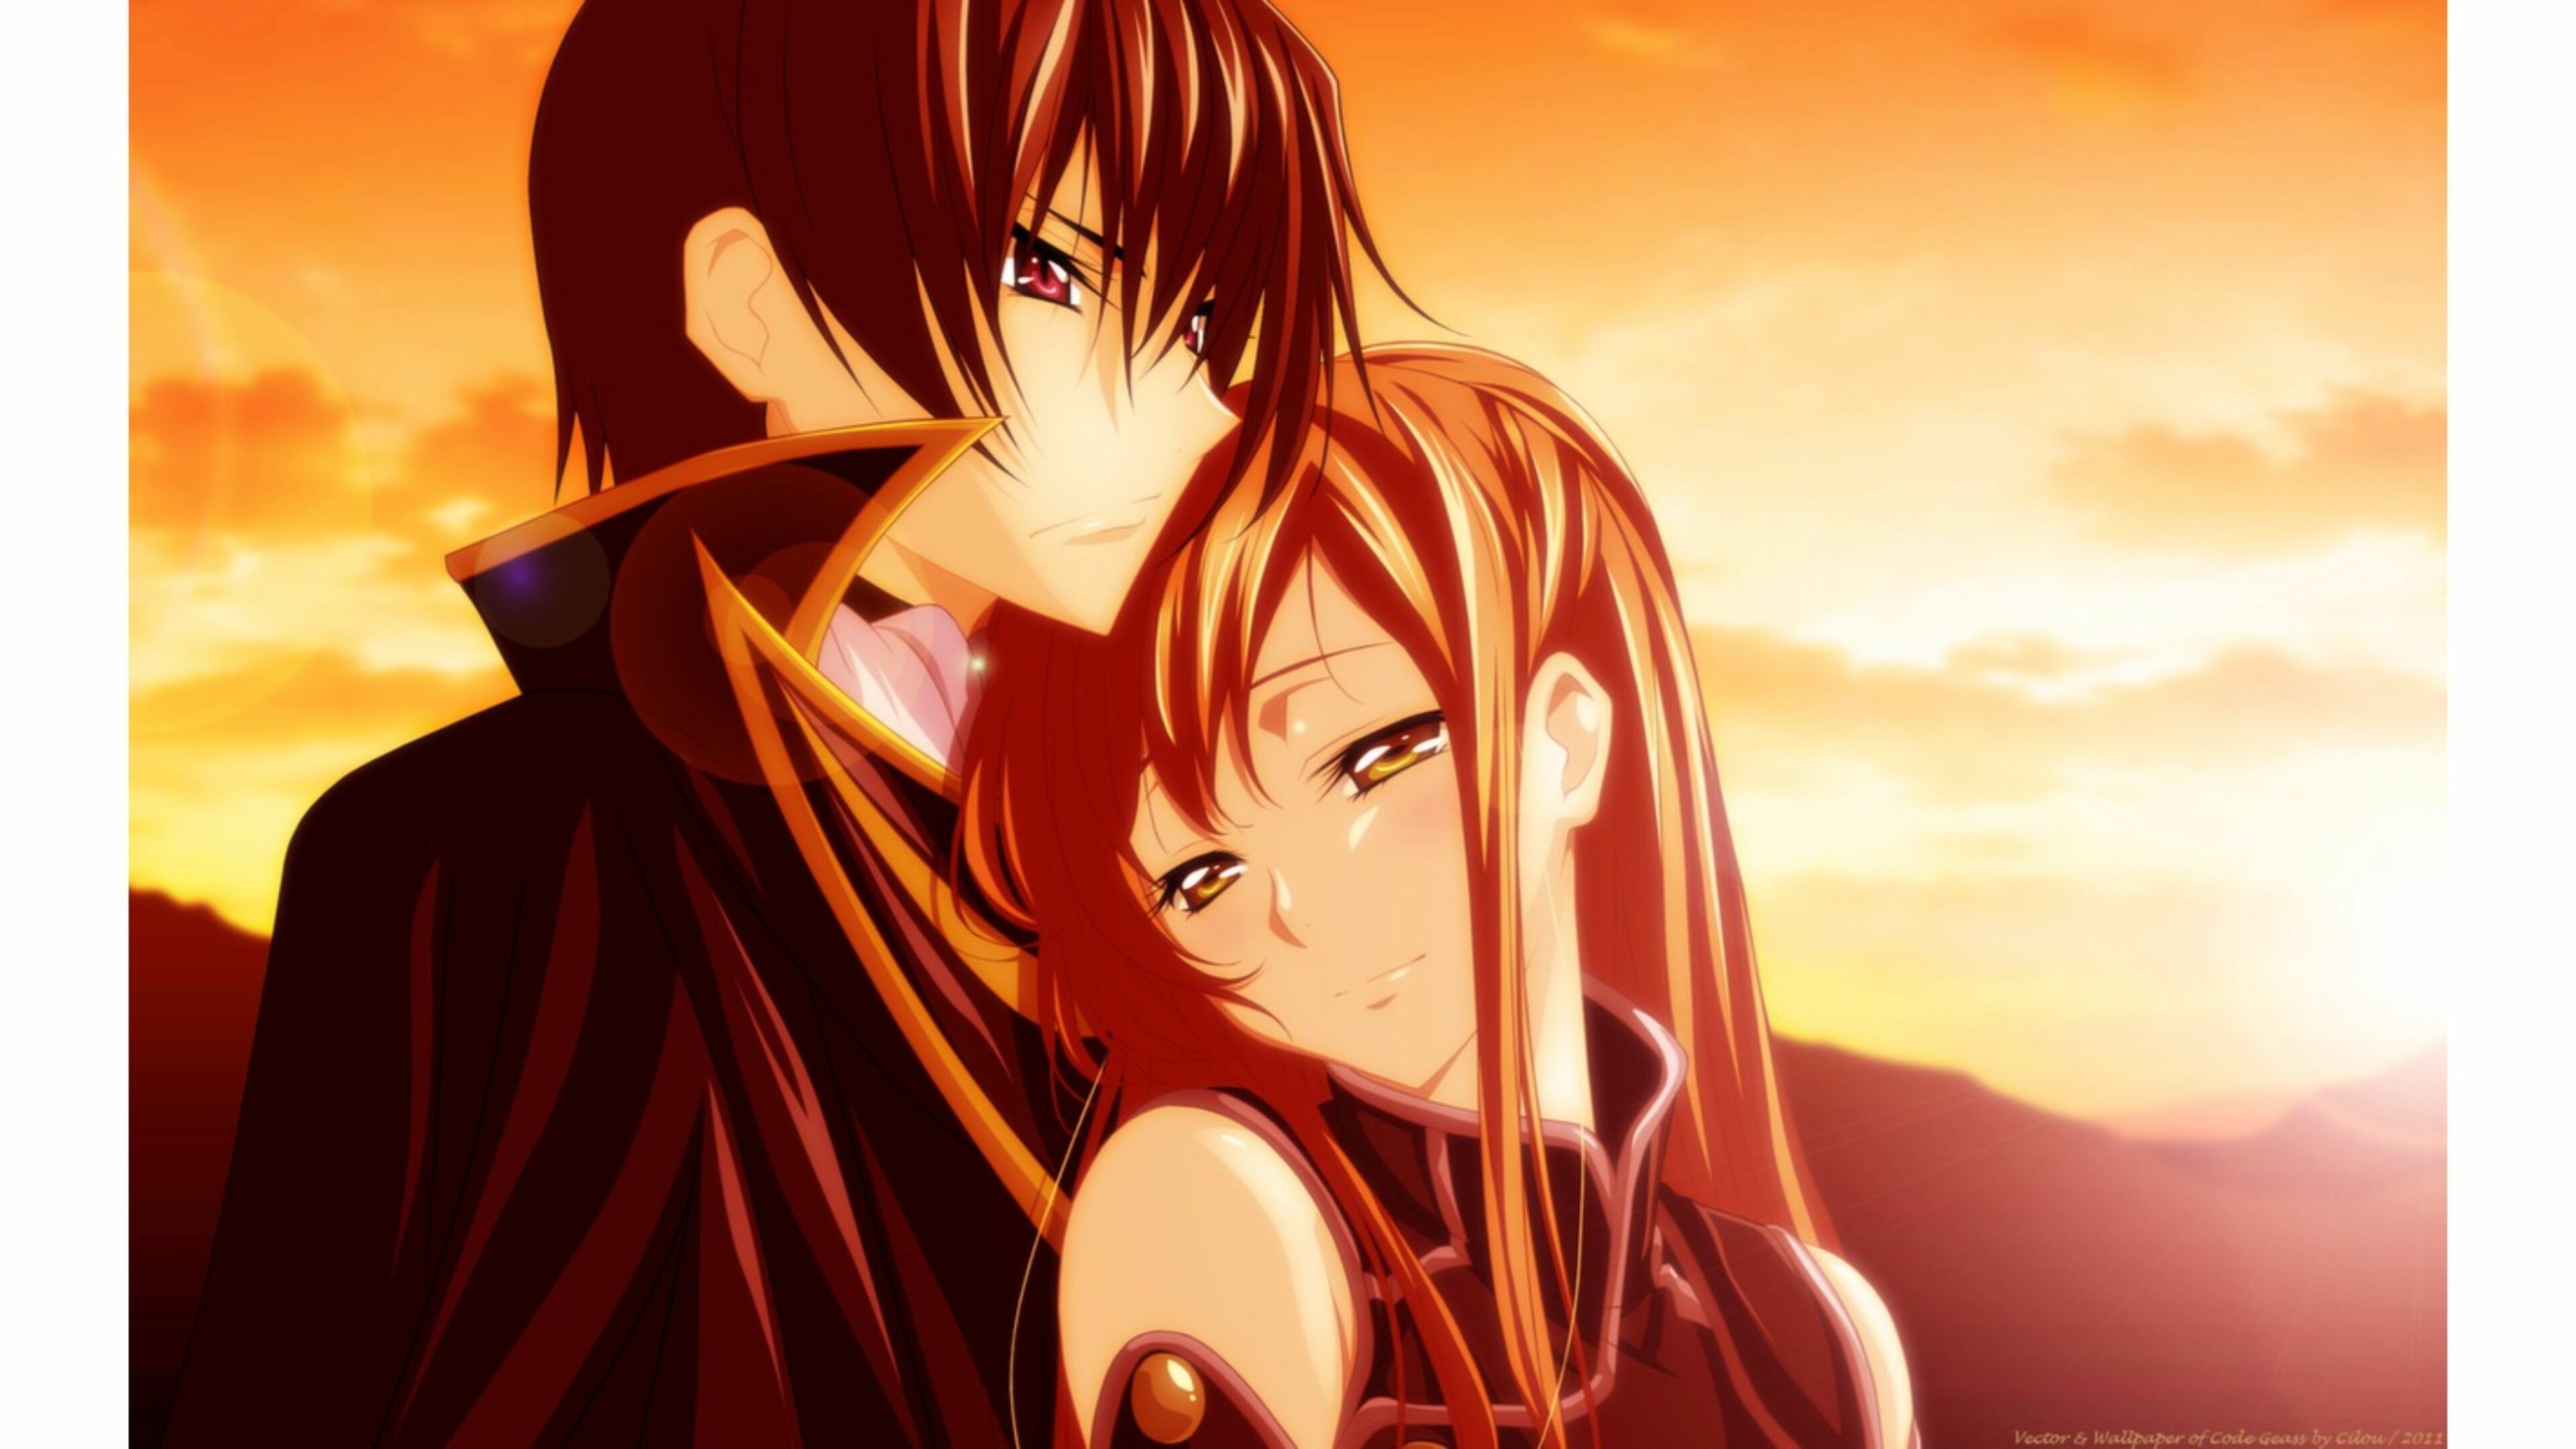 Beautiful Anime Couple Wallpaper HD Images